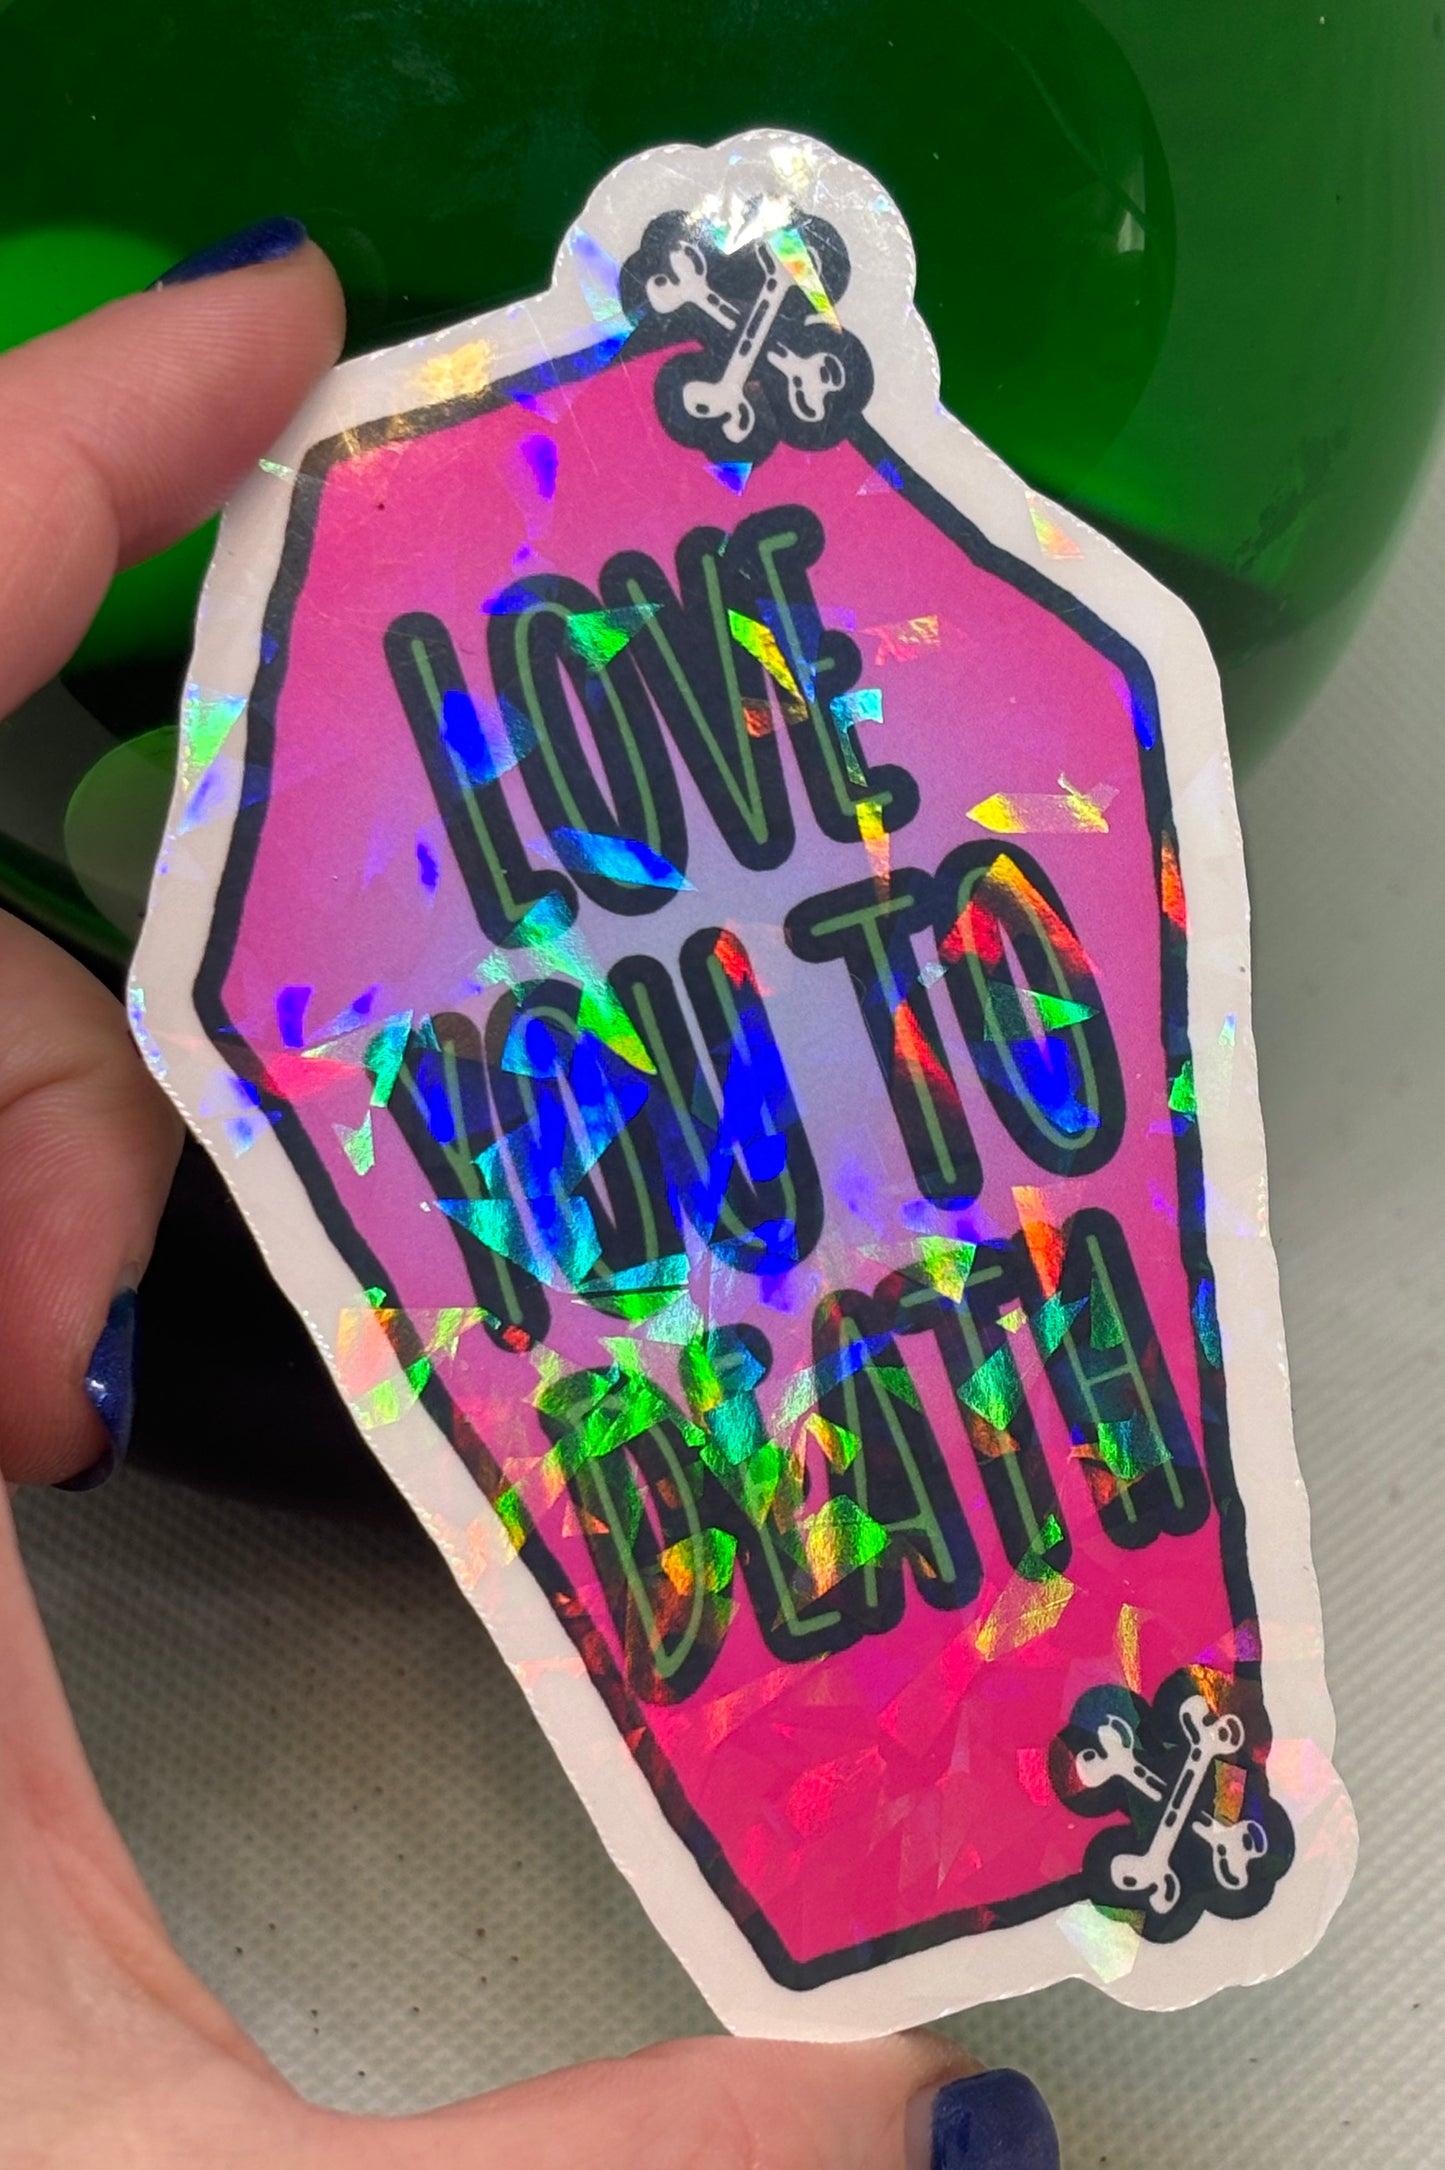 Love You to Death Sticker (Pink)